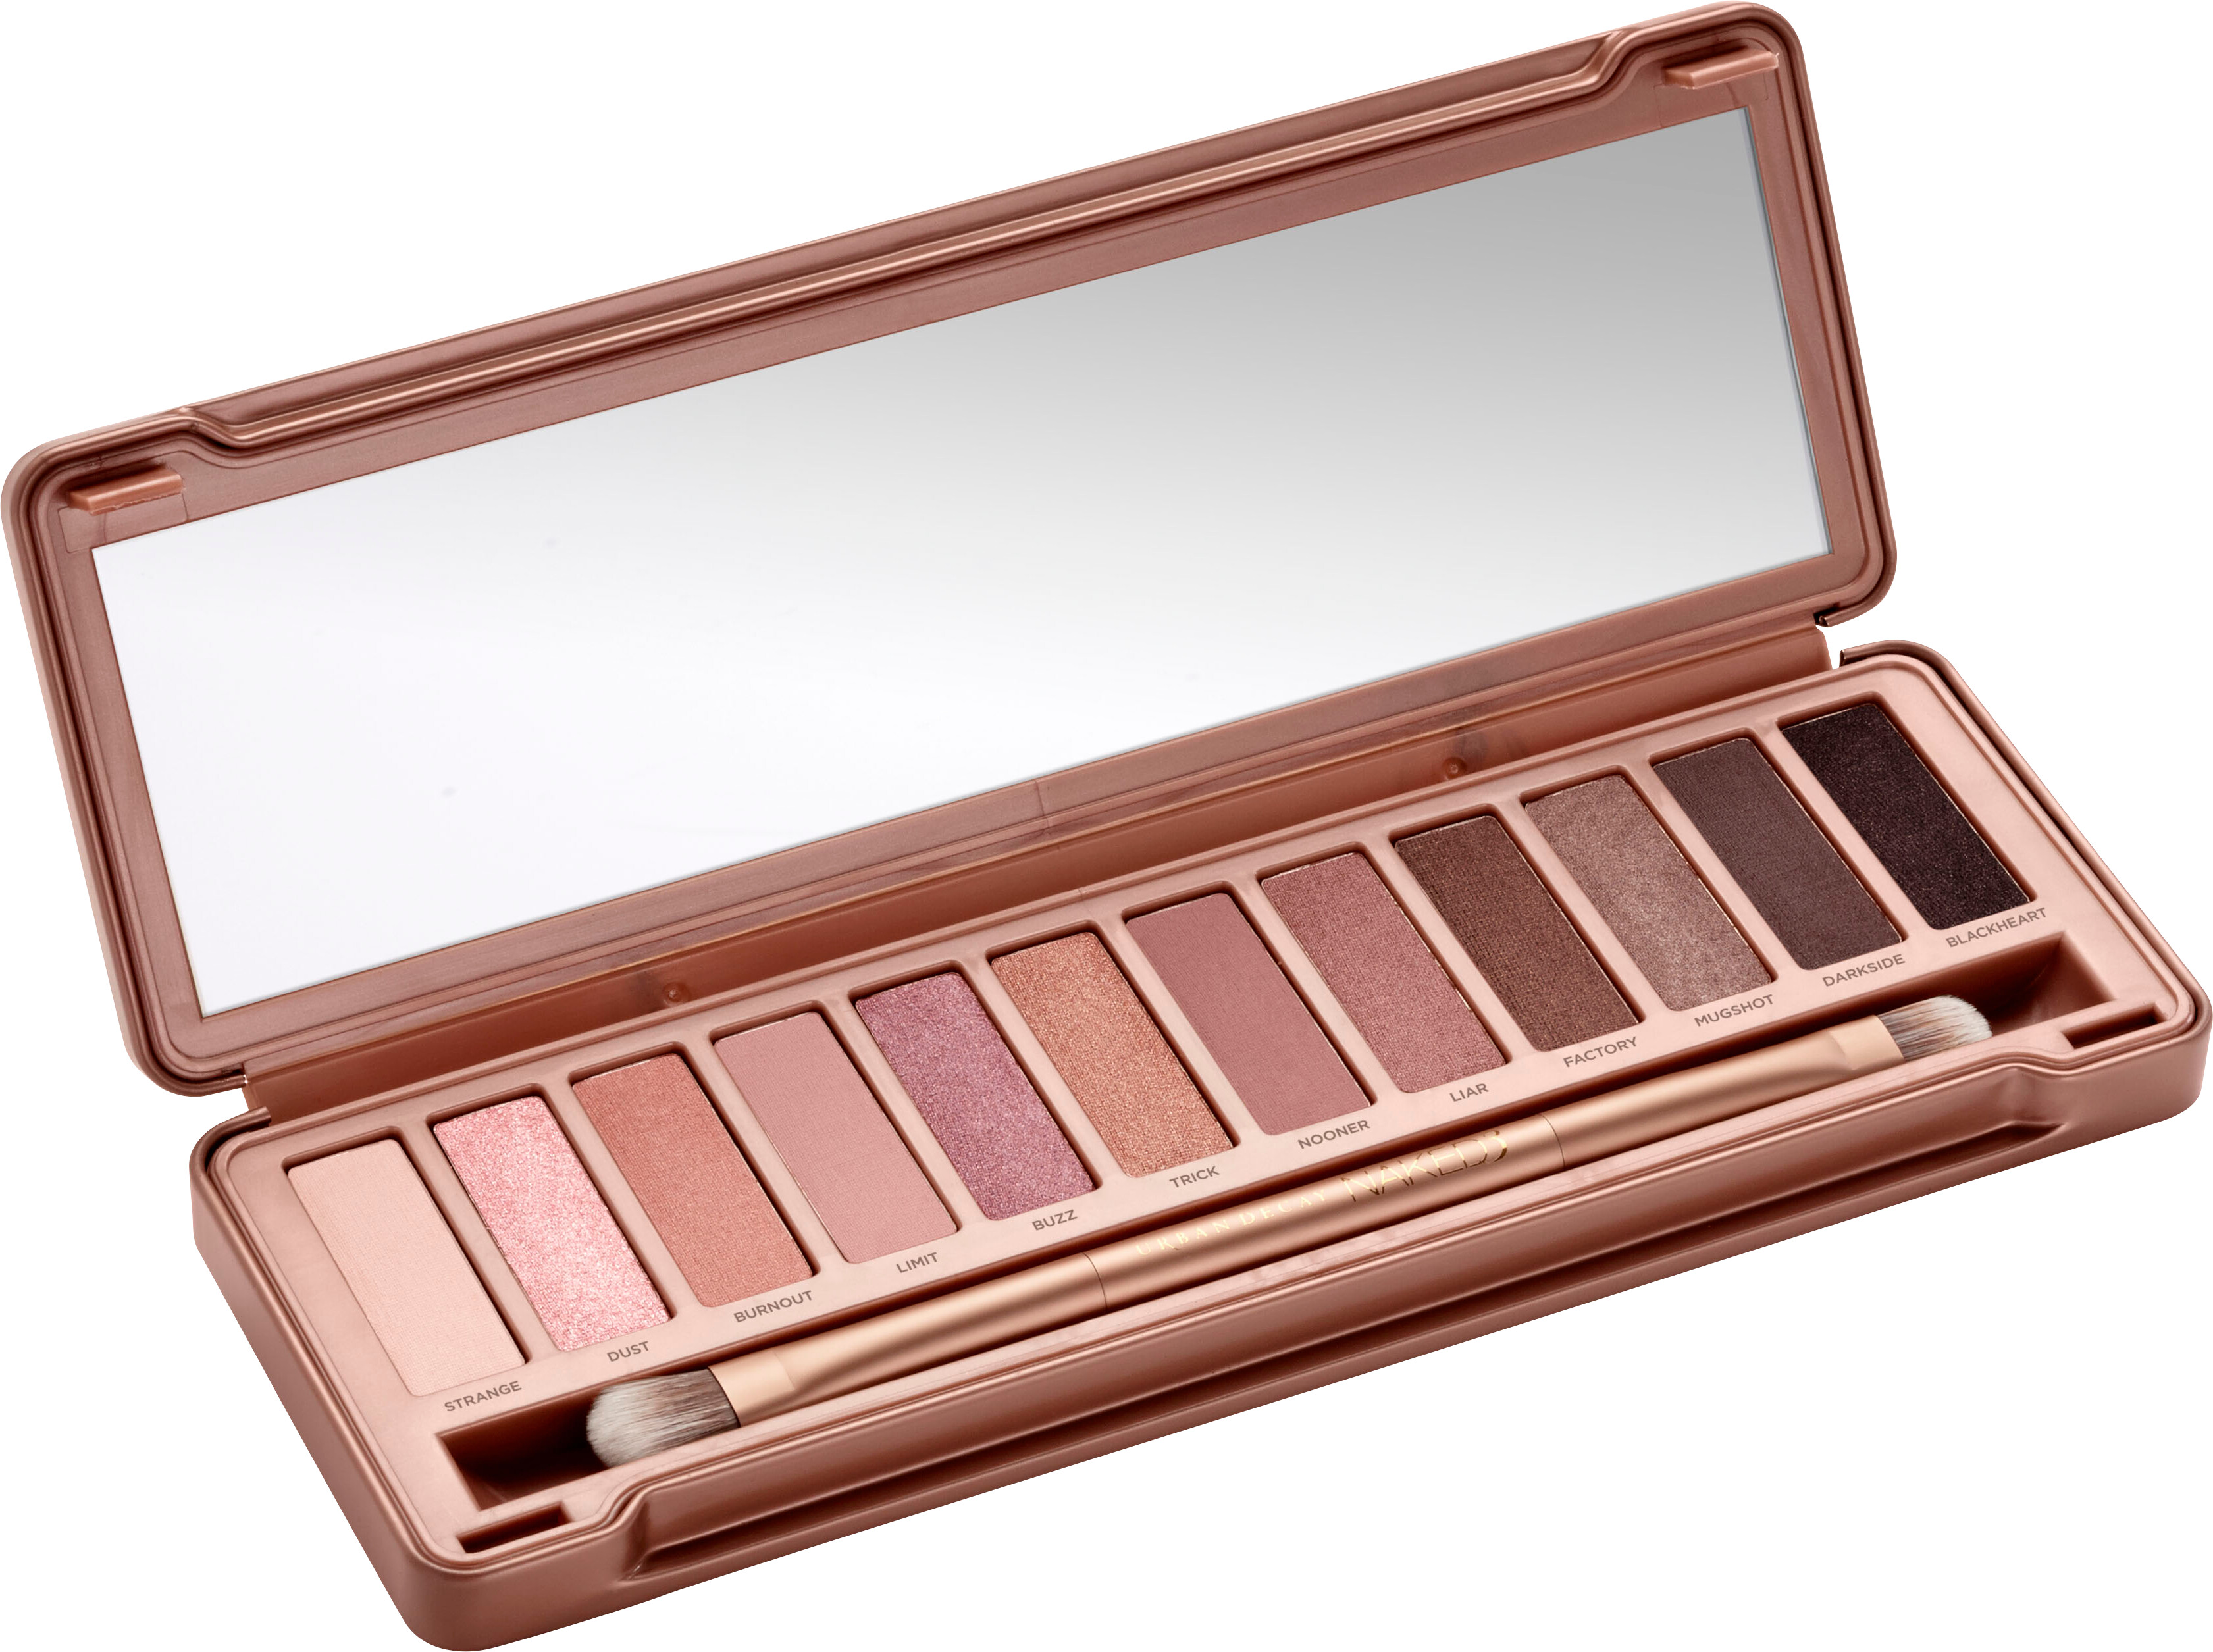 REVIEW & SWATCHES: Urban Decay Naked 3 Palette - From Head 